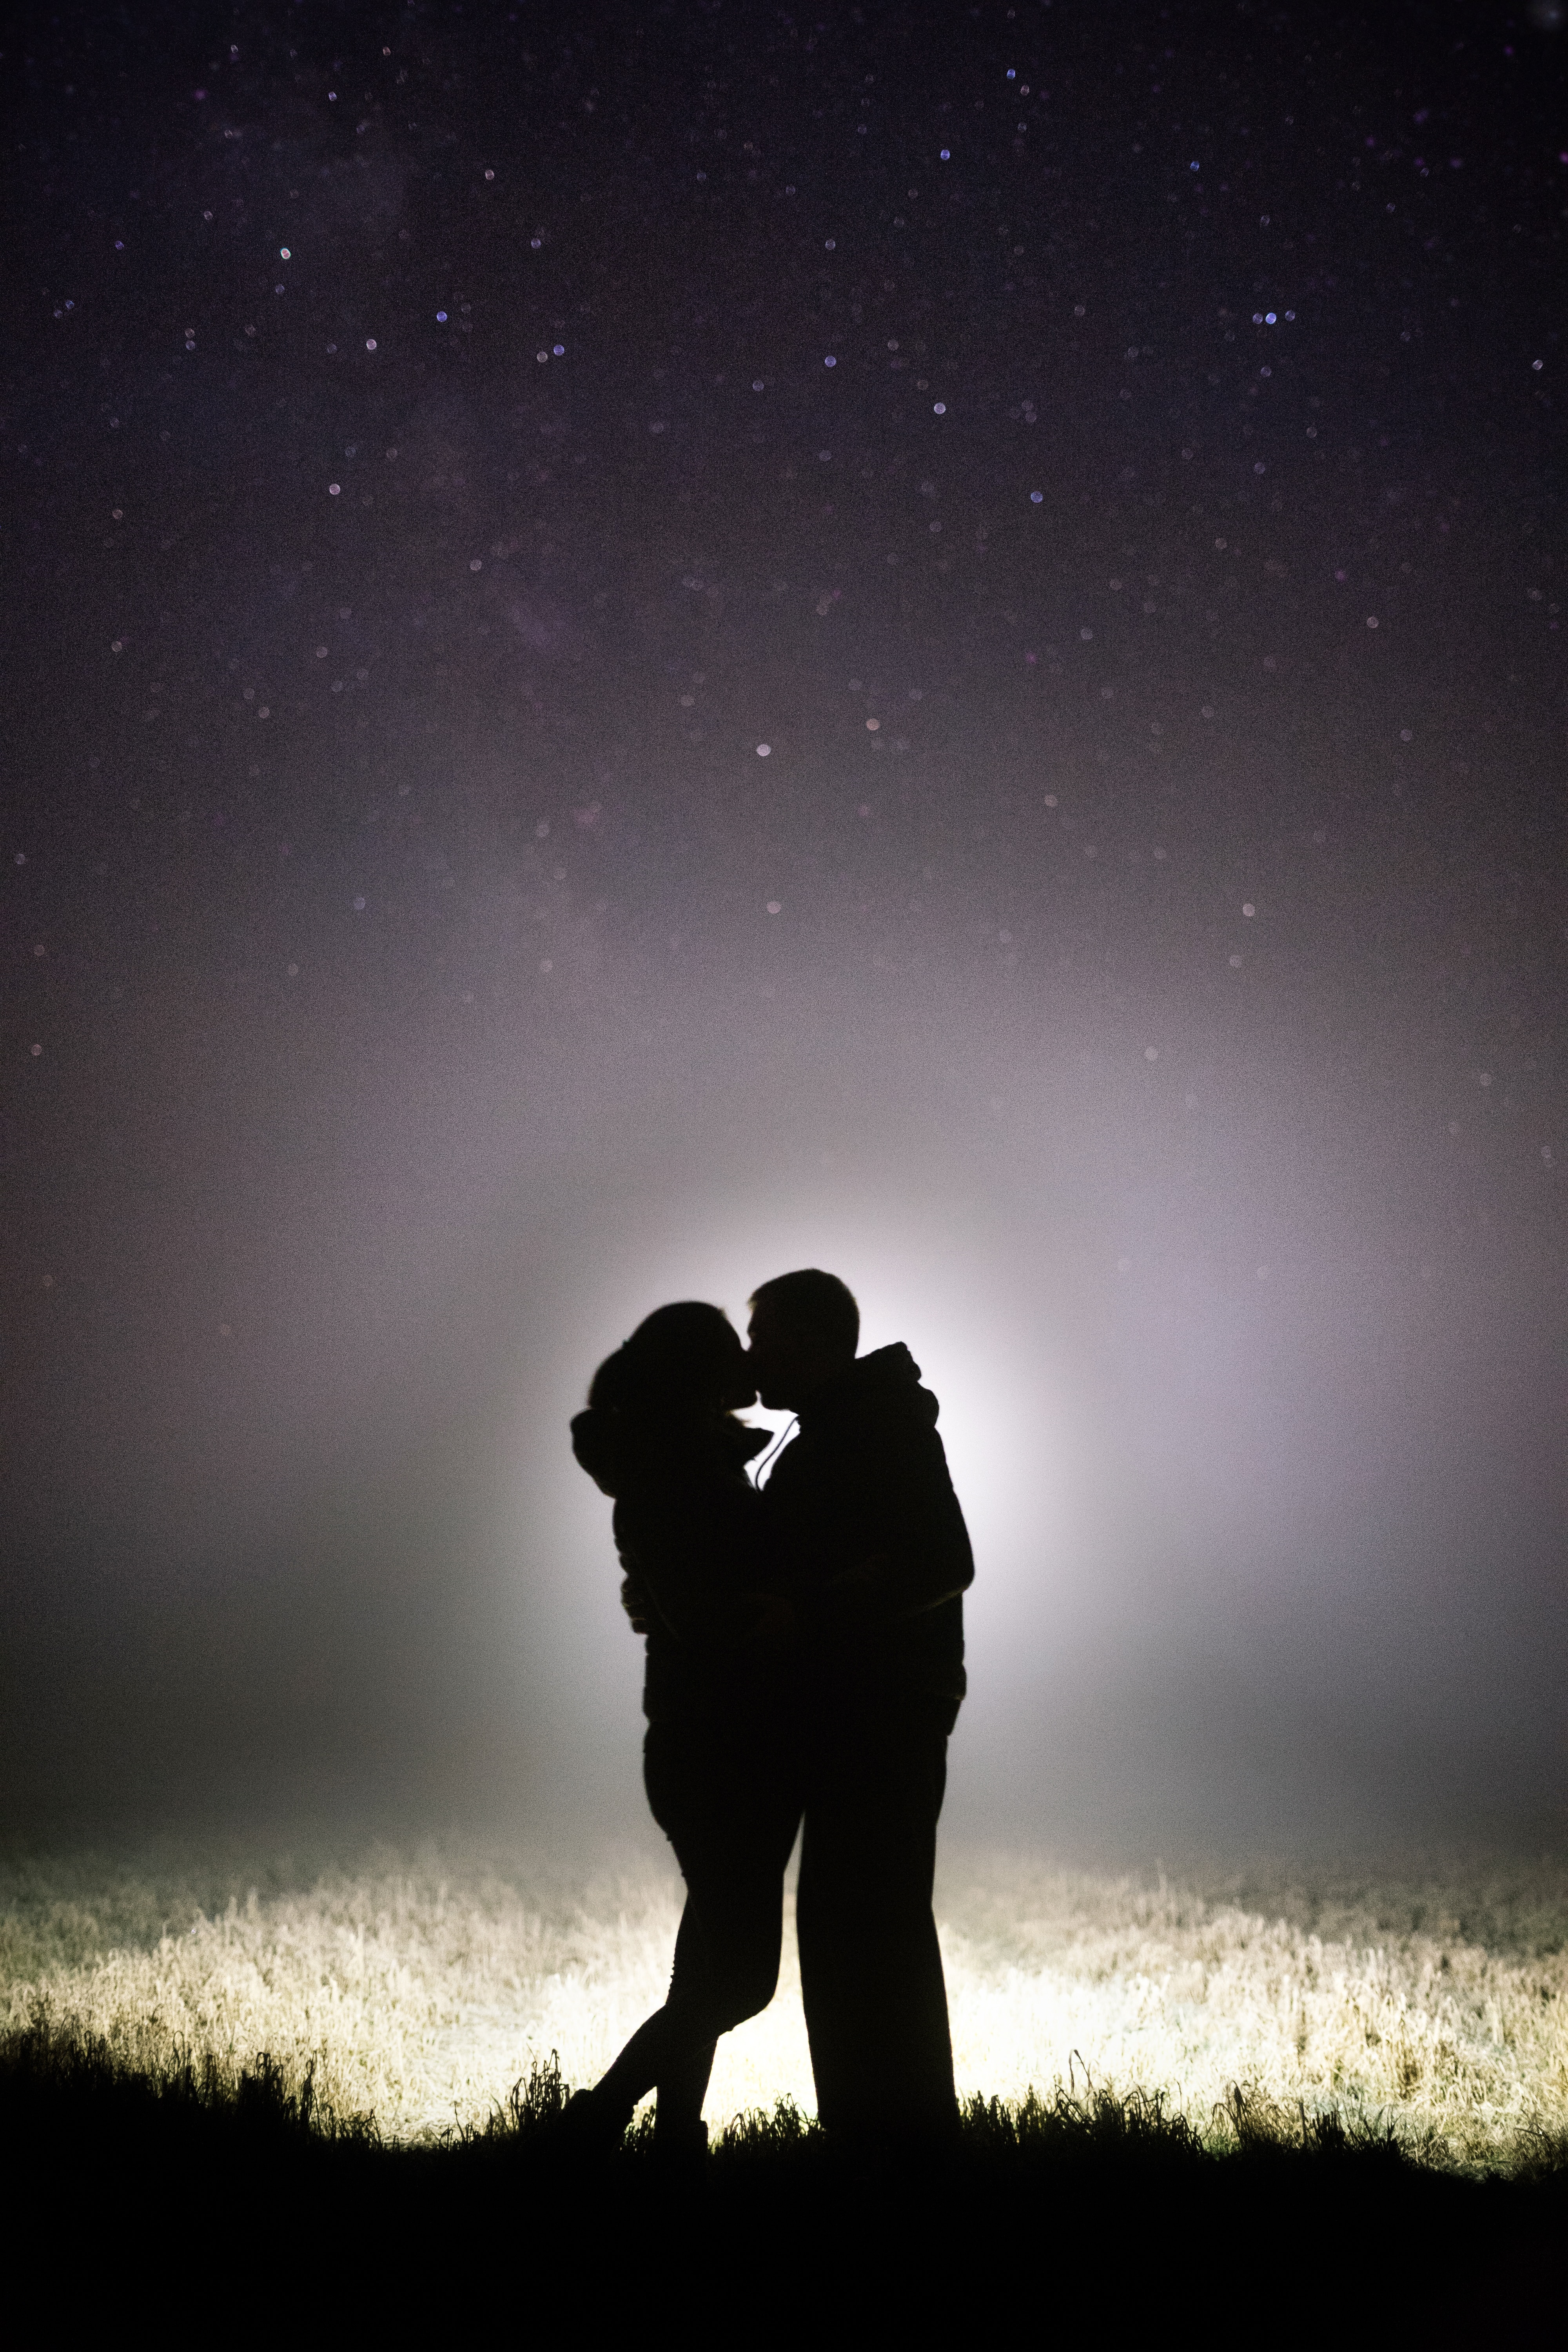 android pair, couple, love, silhouettes, romance, kiss